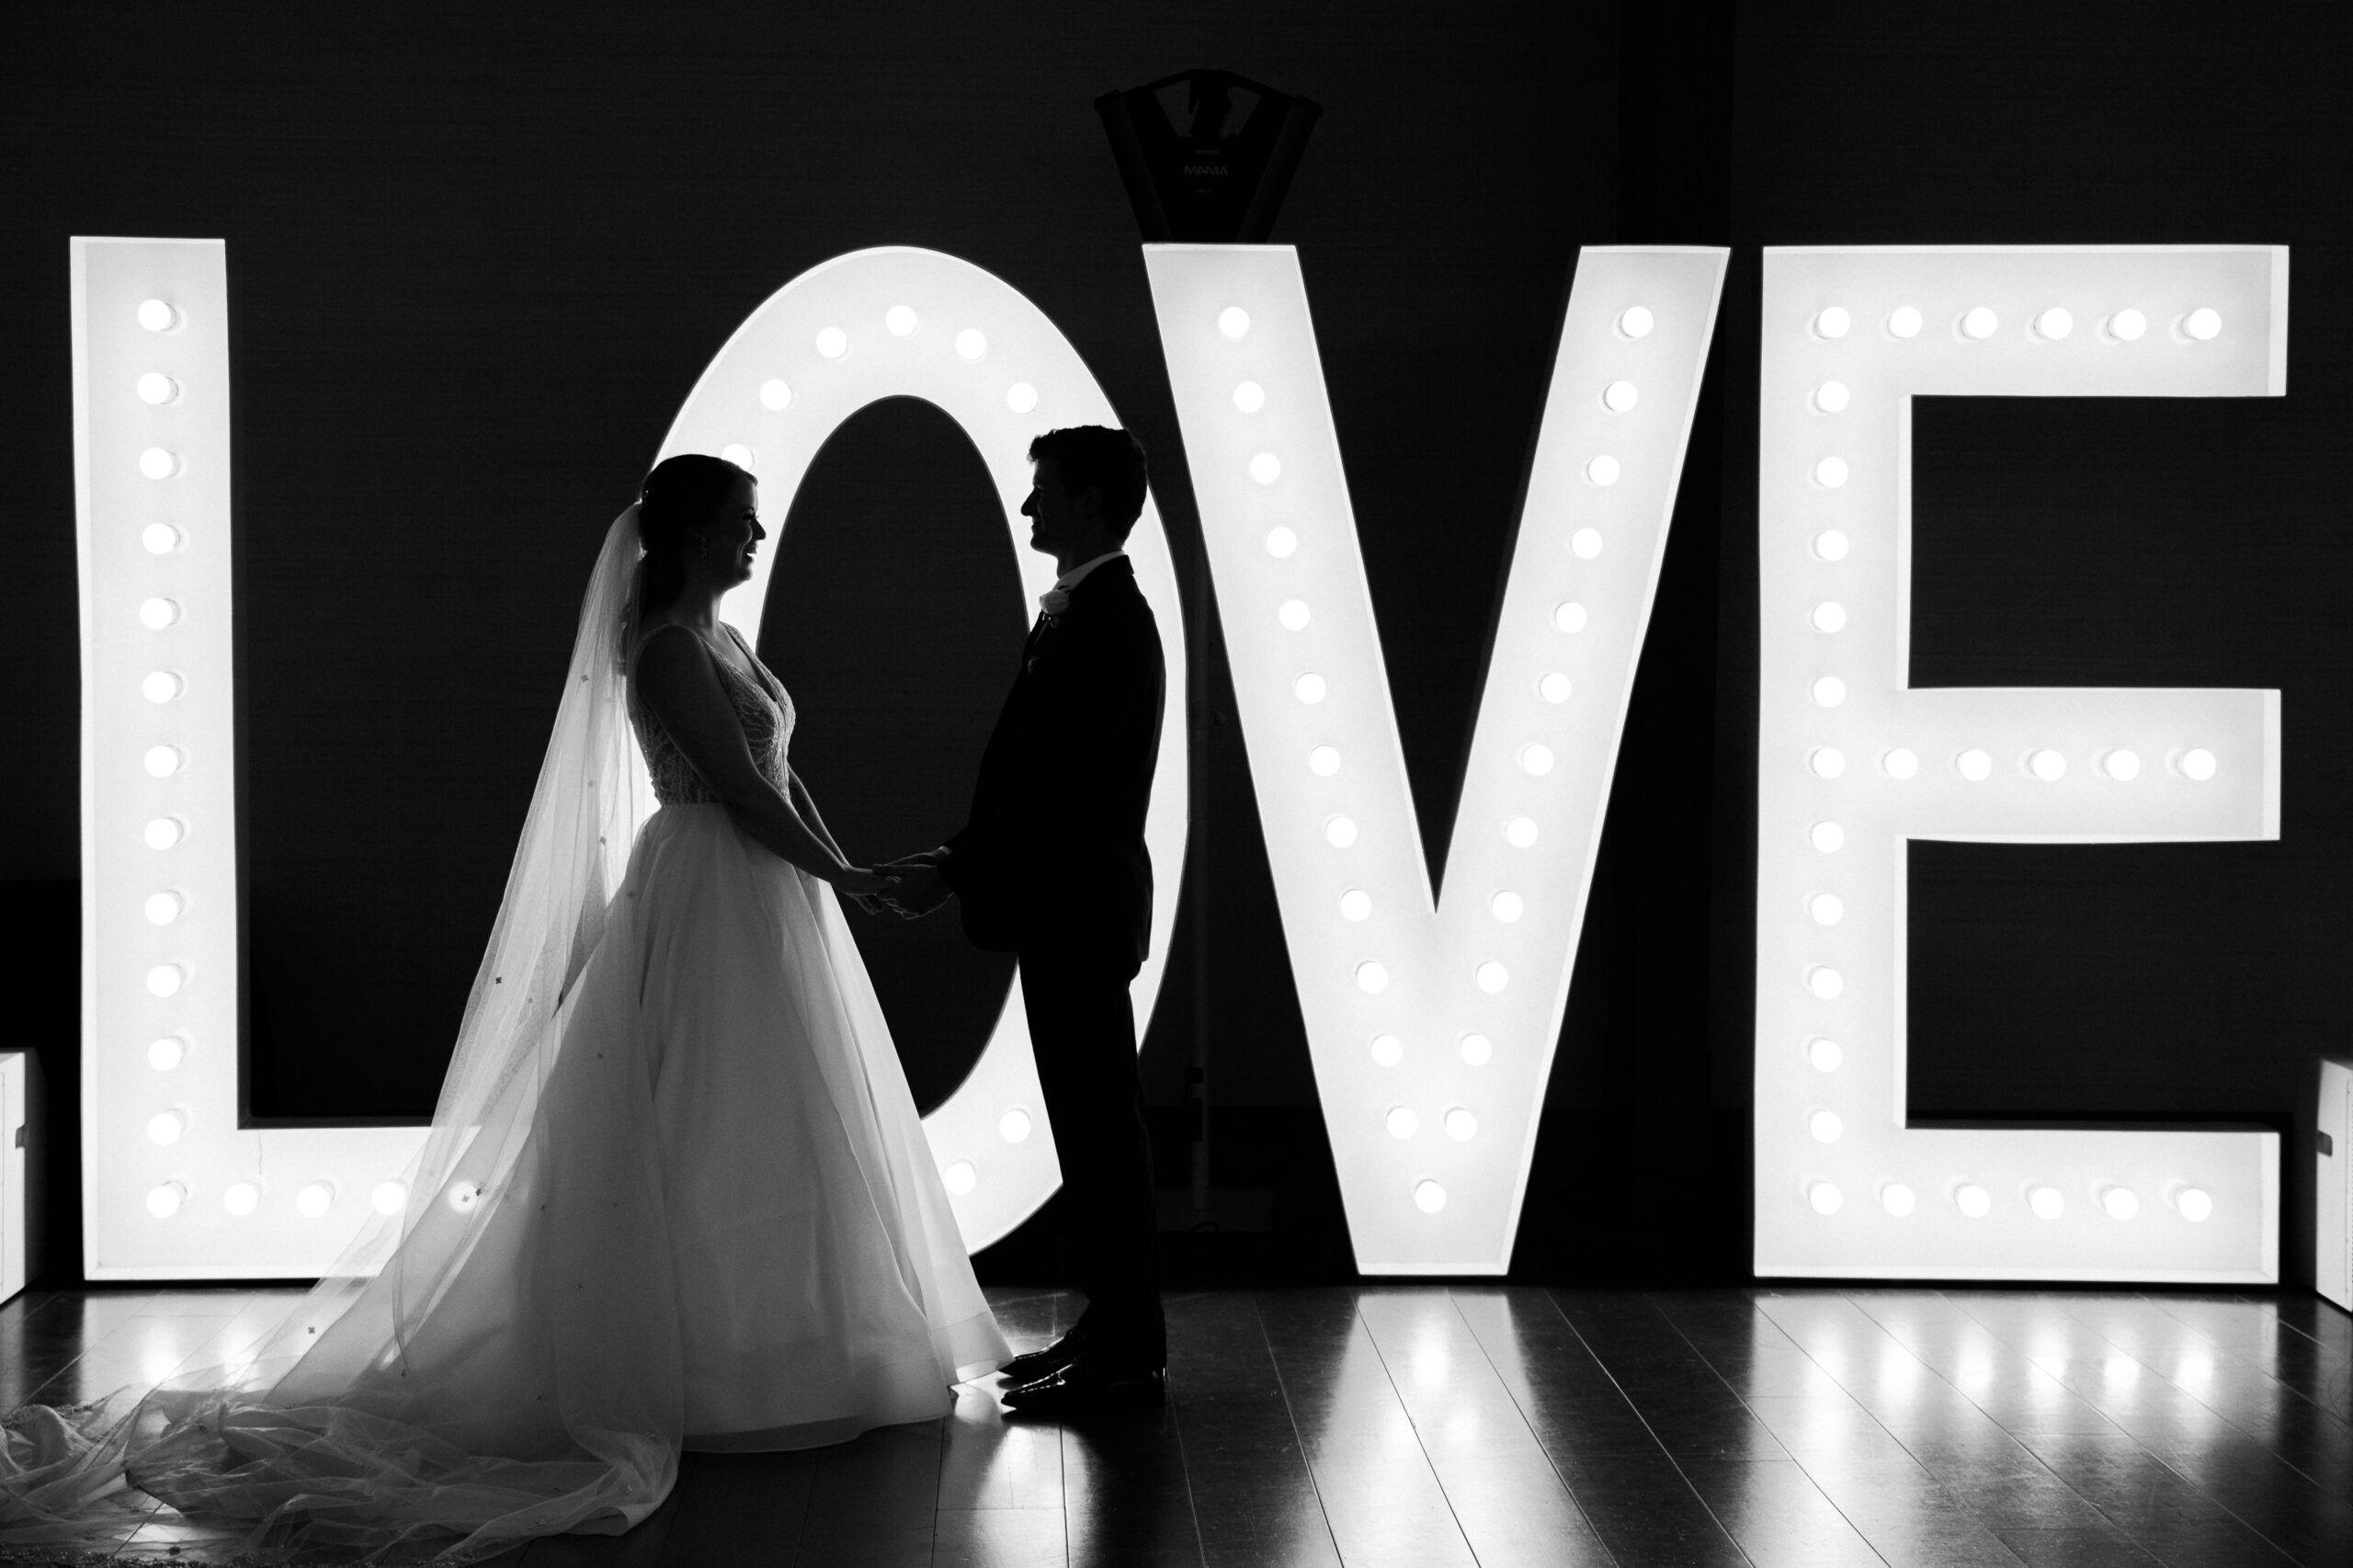 A couple holding hands in front of a large, lit up sign that says "LOVE"